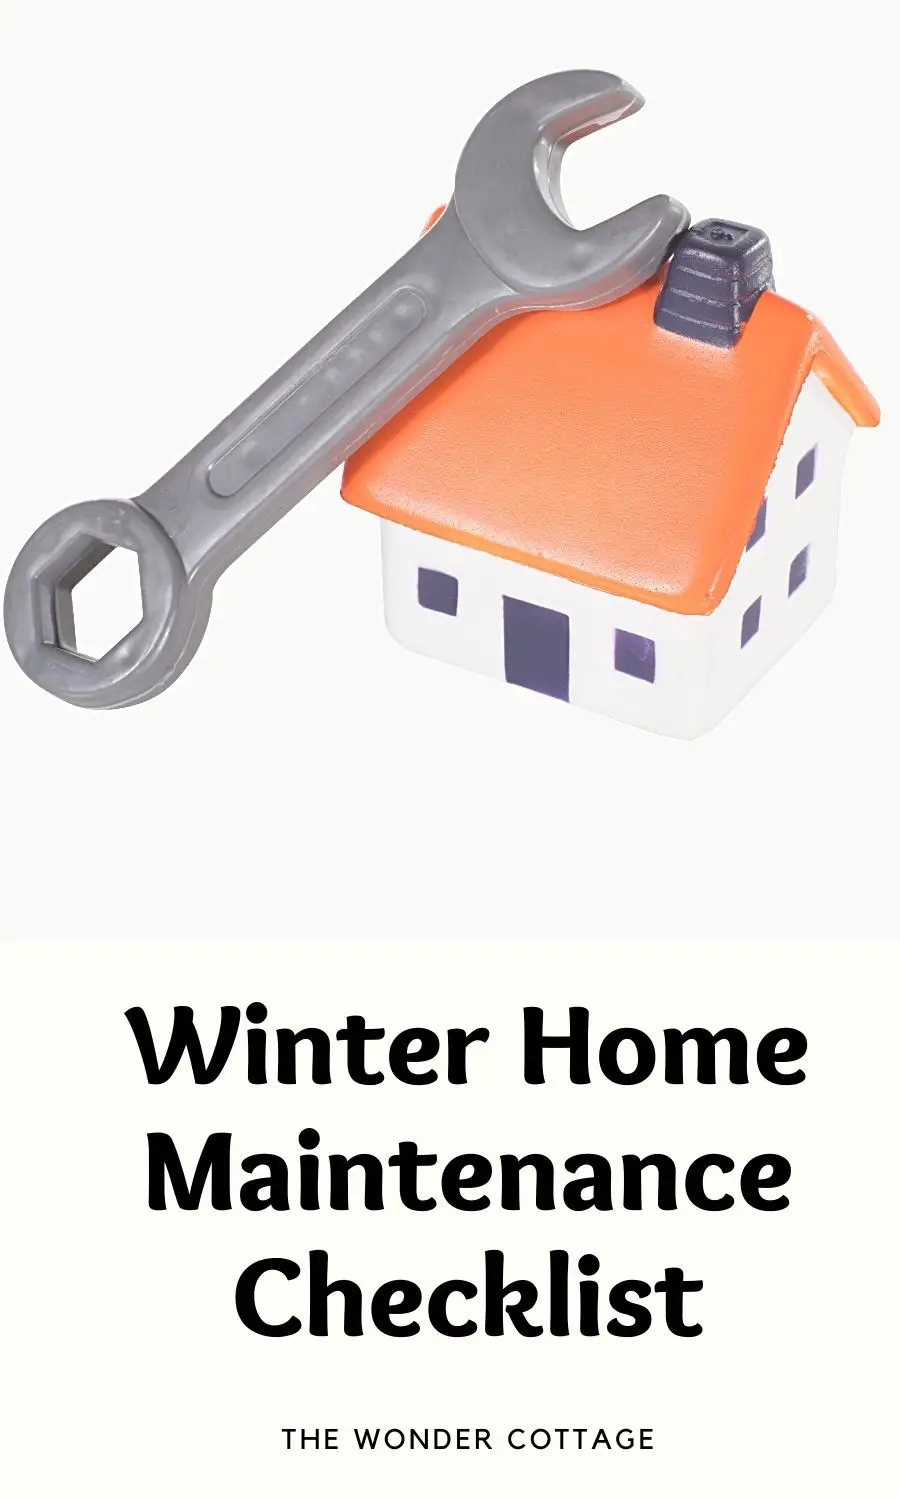 The Ultimate Winter Home Maintenance Checklist